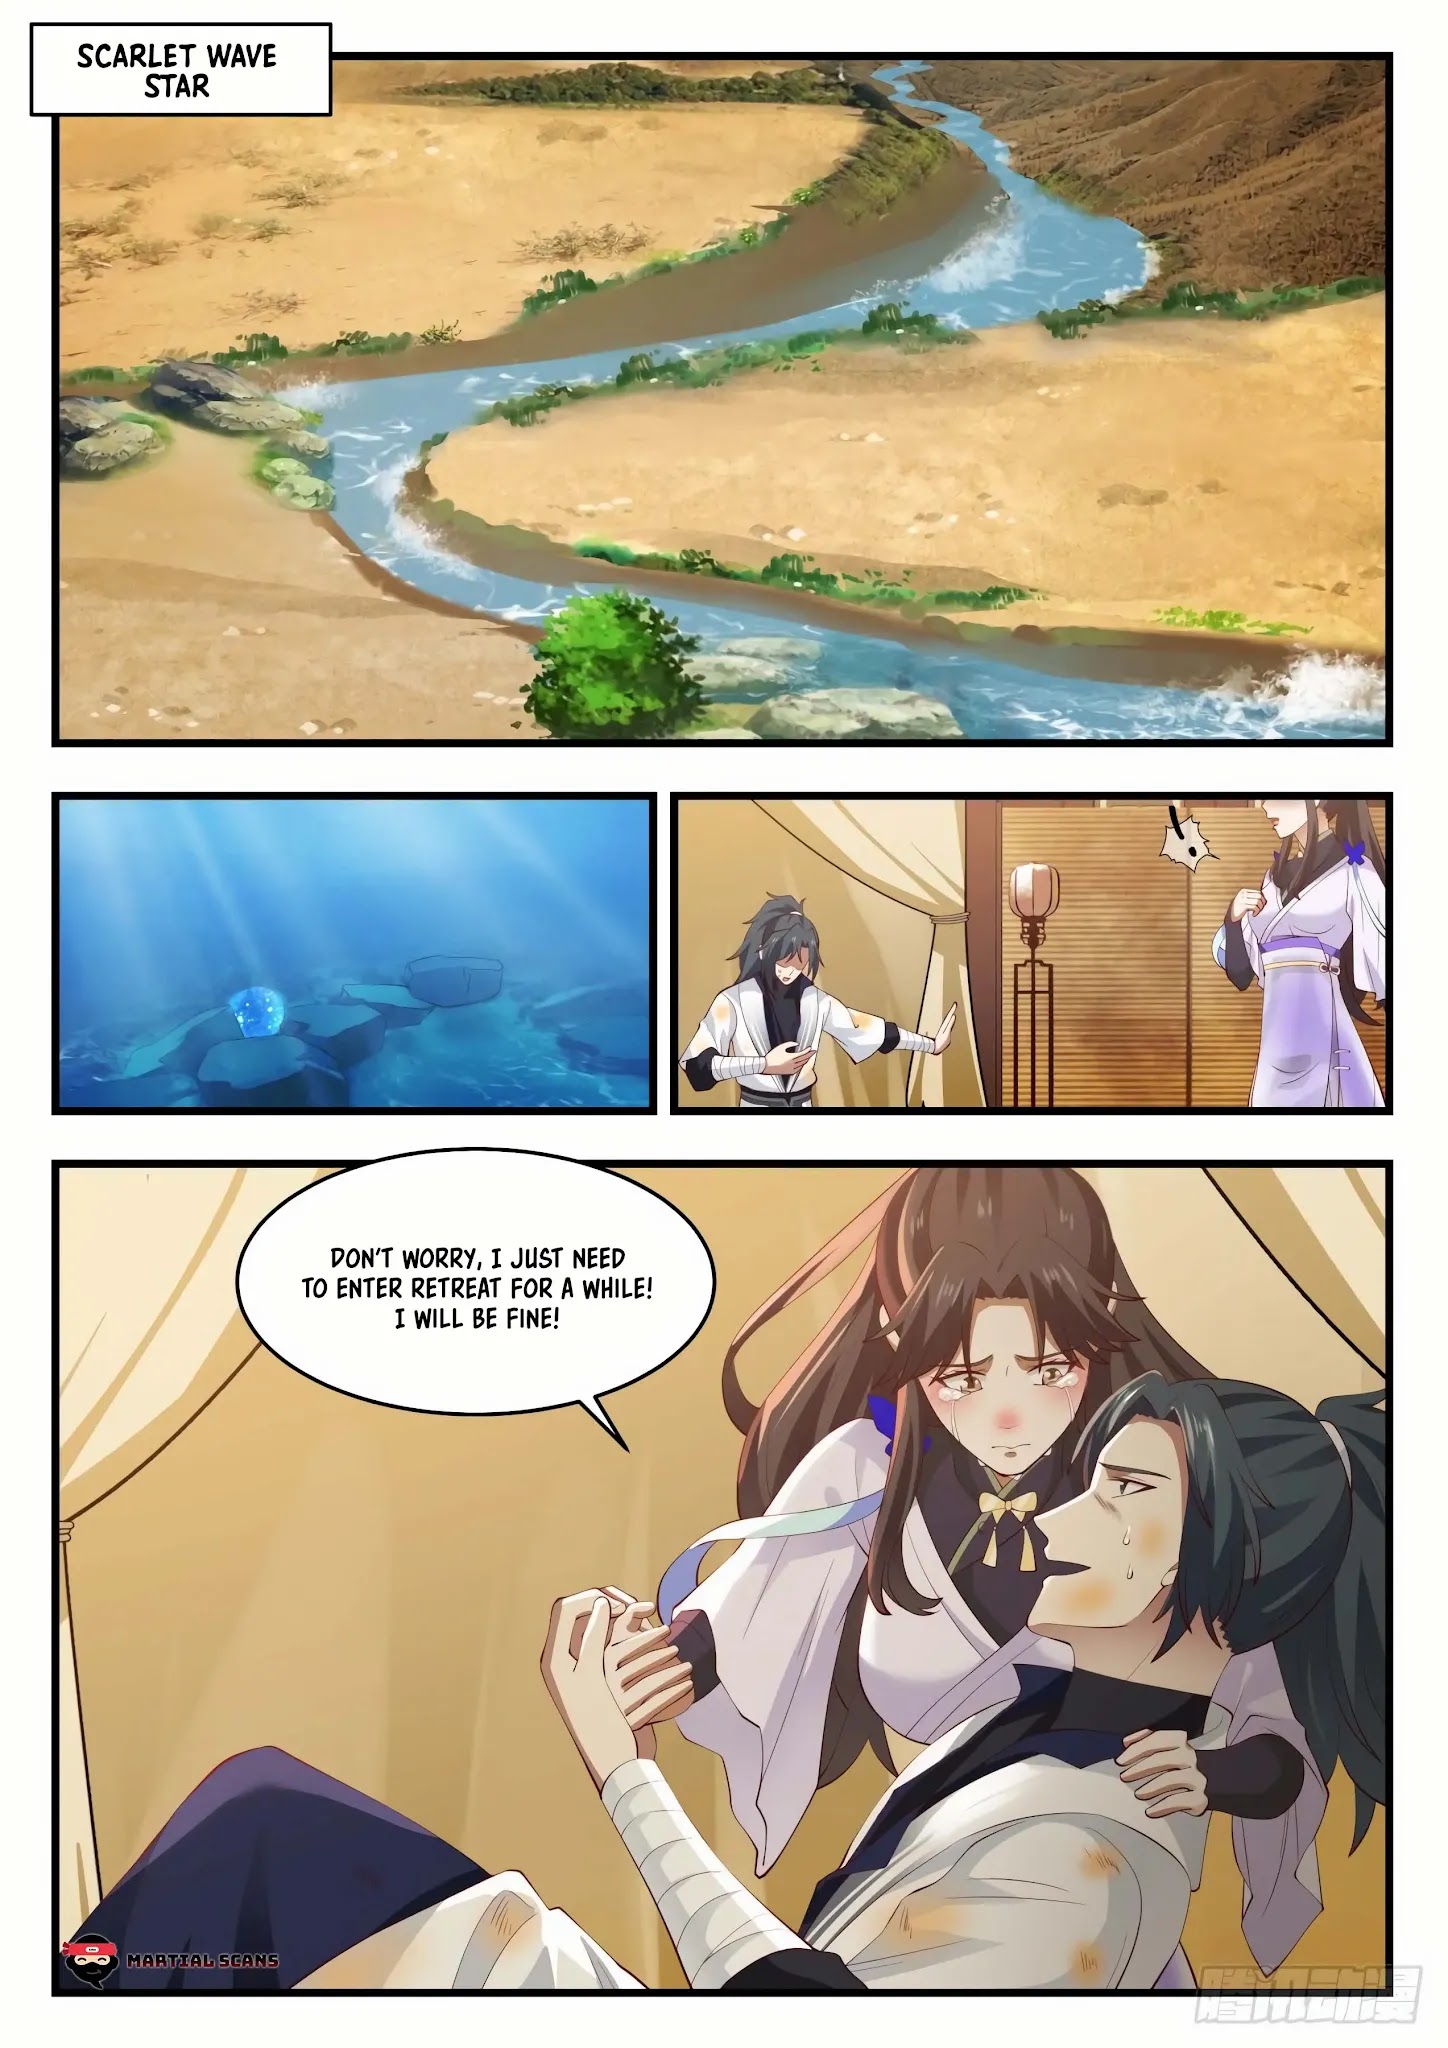 Martial Peak Chapter 1396: Scarlet Wave Star’S Pure Ice Island - Picture 2